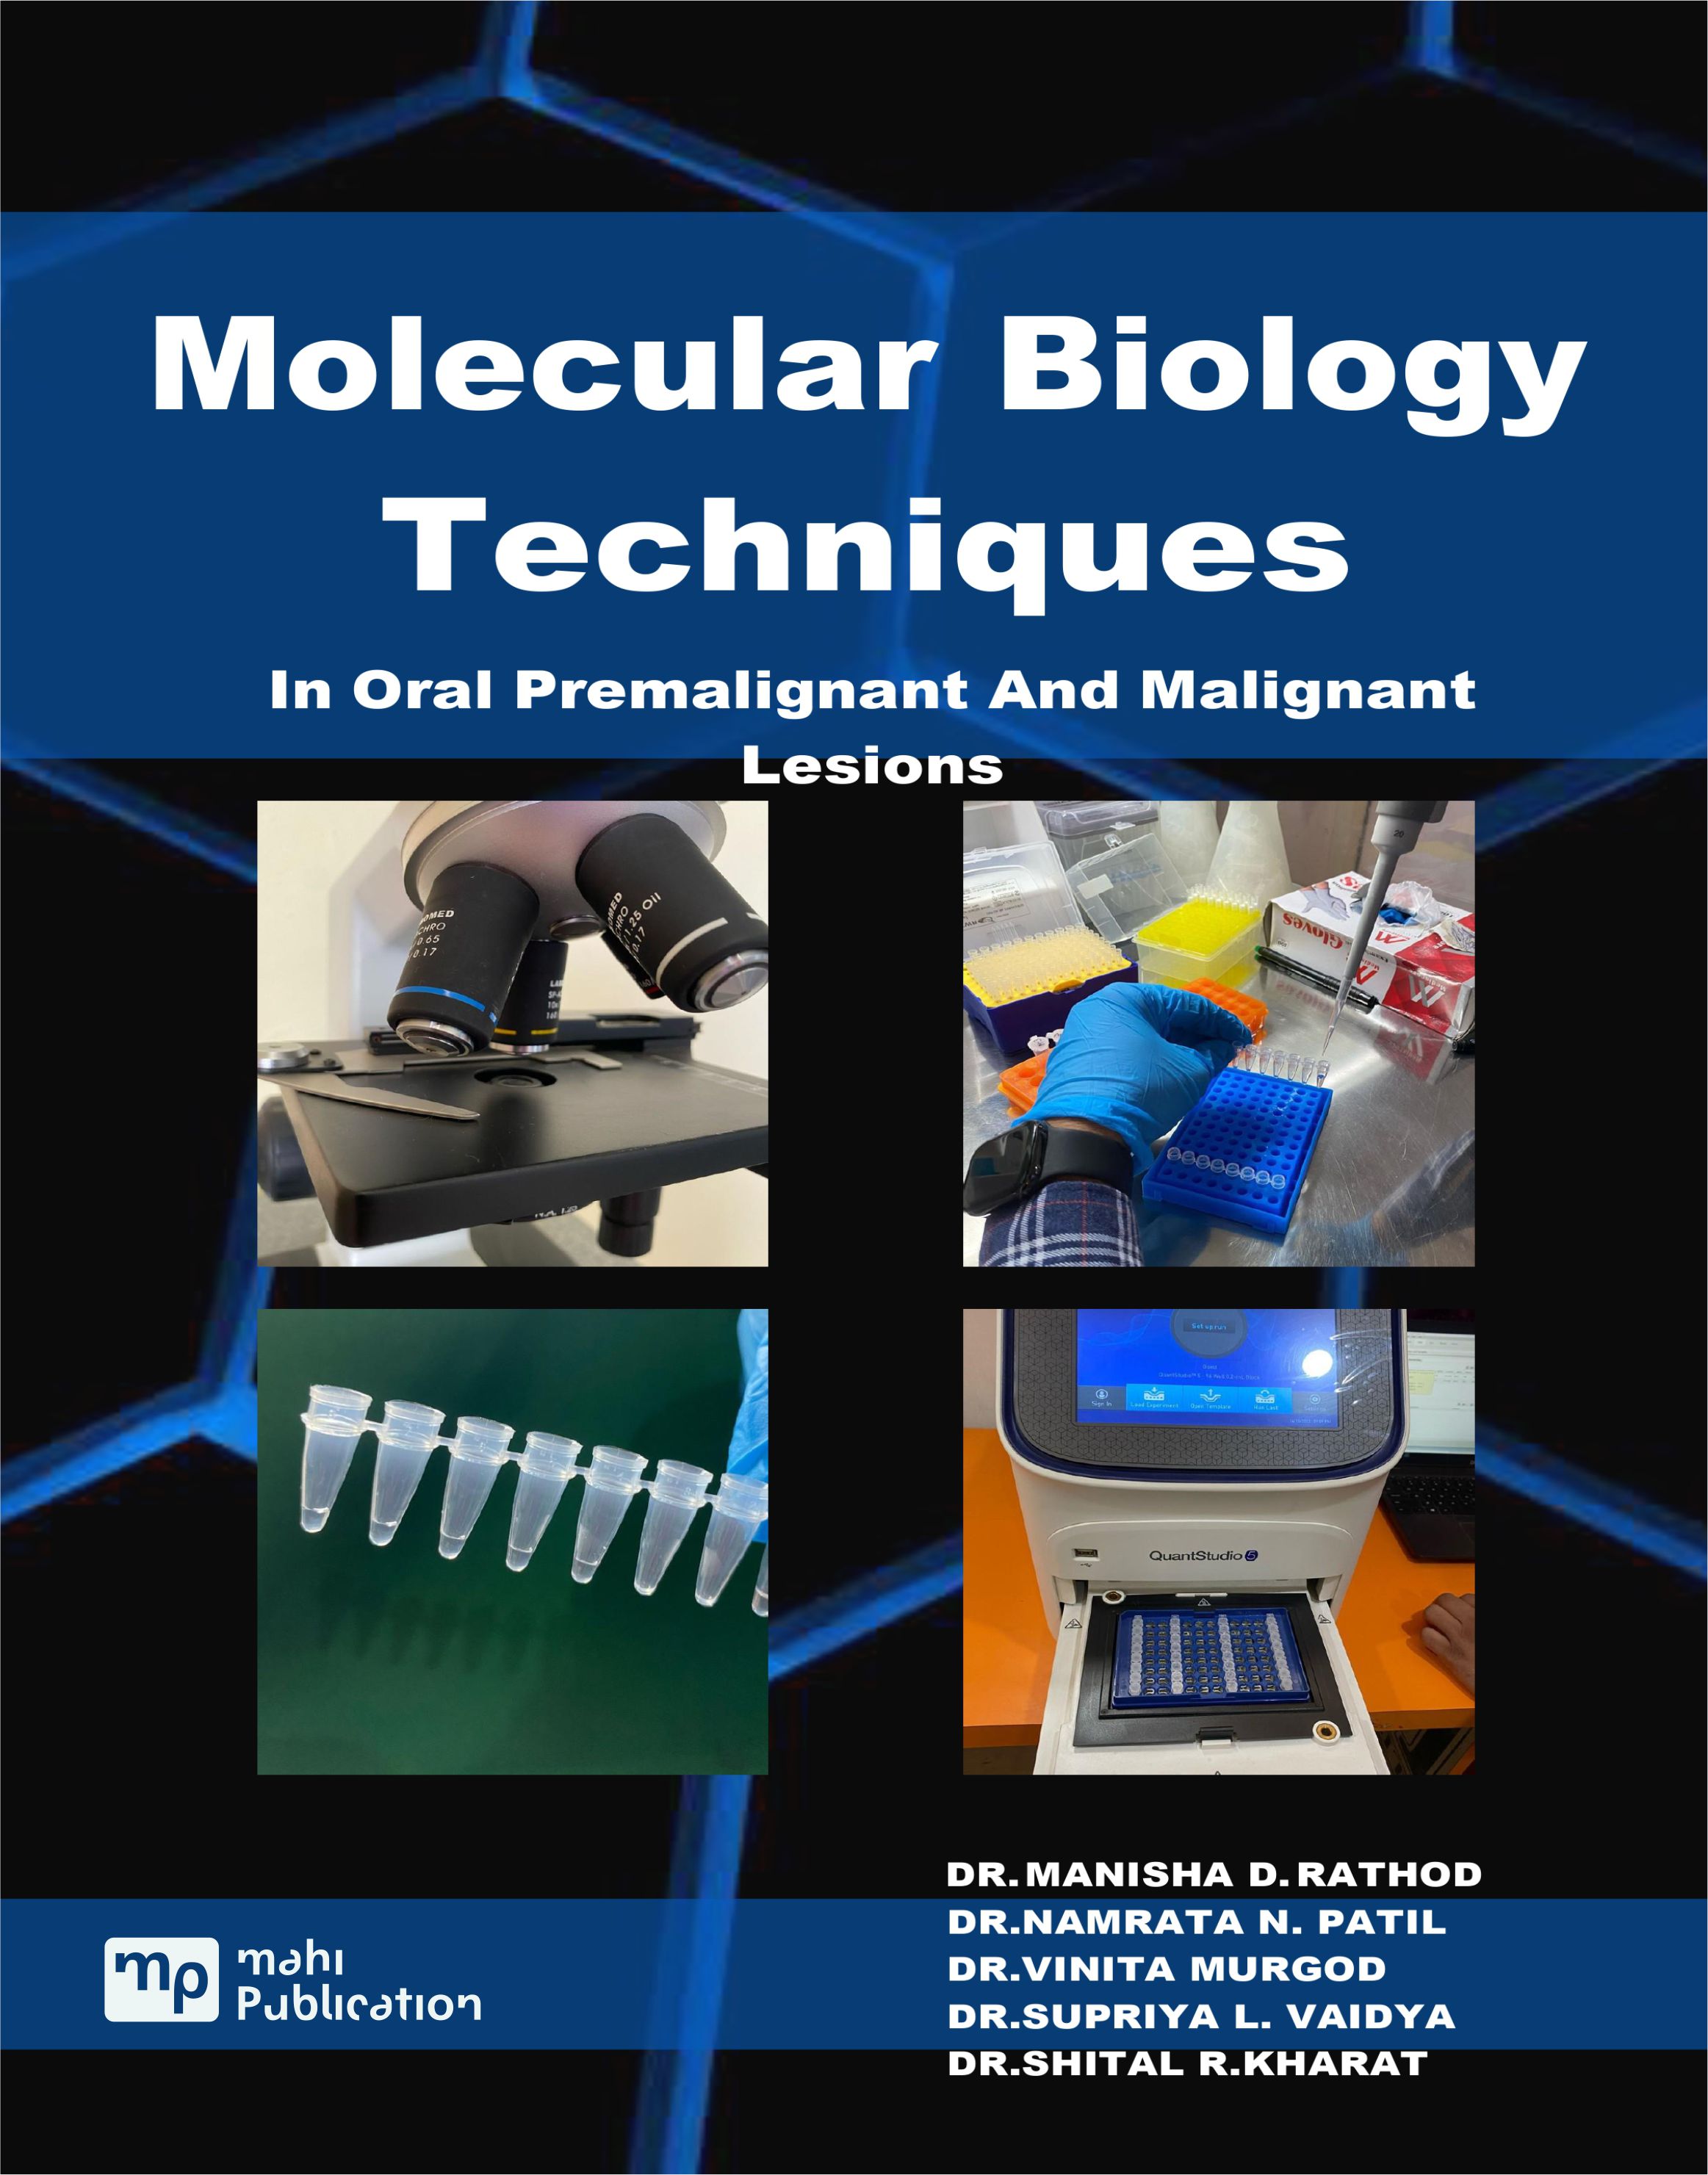 Molecular Biology Techniques in Oral Premalignant and Malignant Lesions